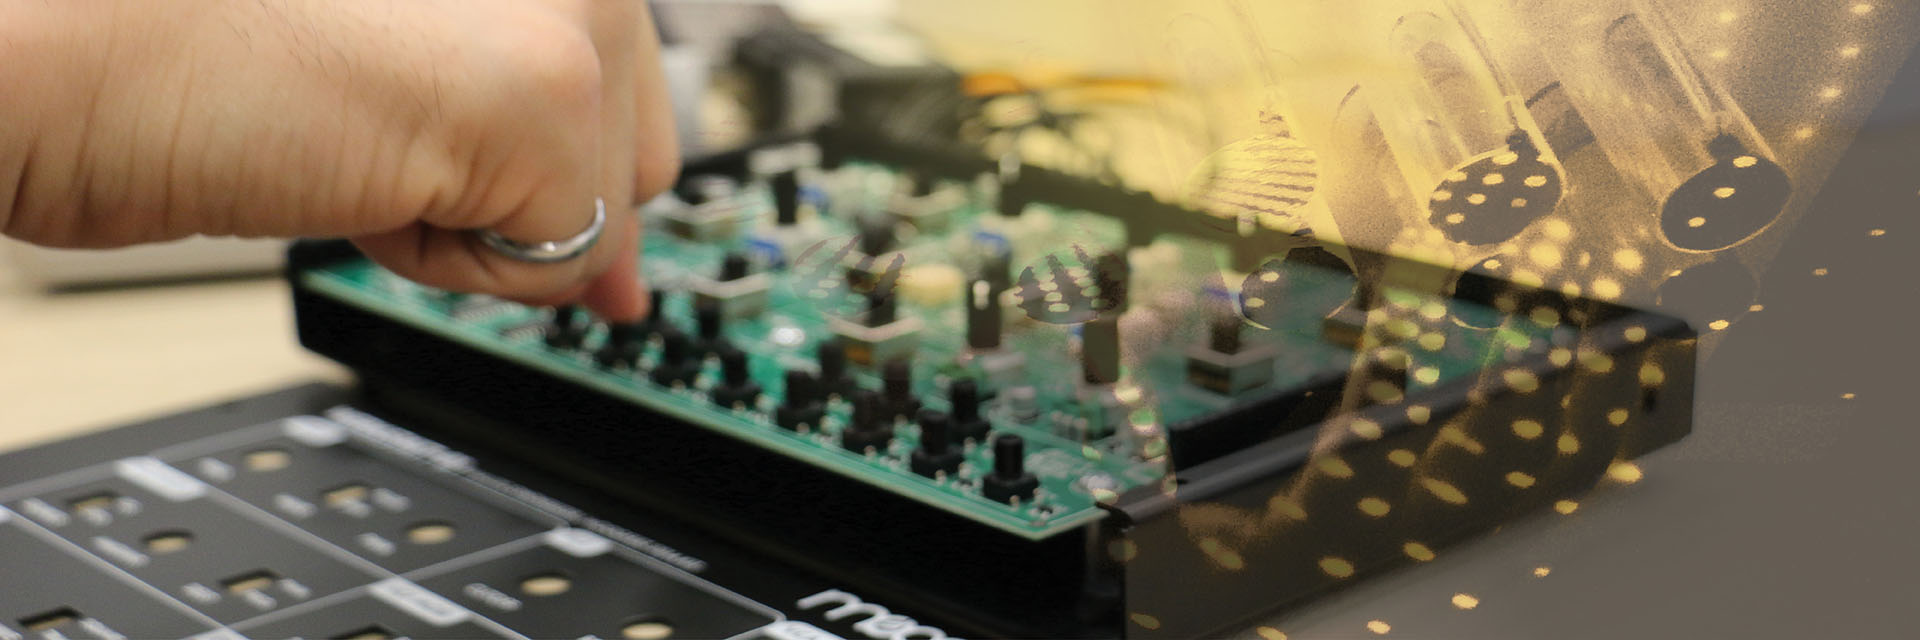 A student's hands working on a partially disassembled Moog synthesizer, with an exposed circuit board.